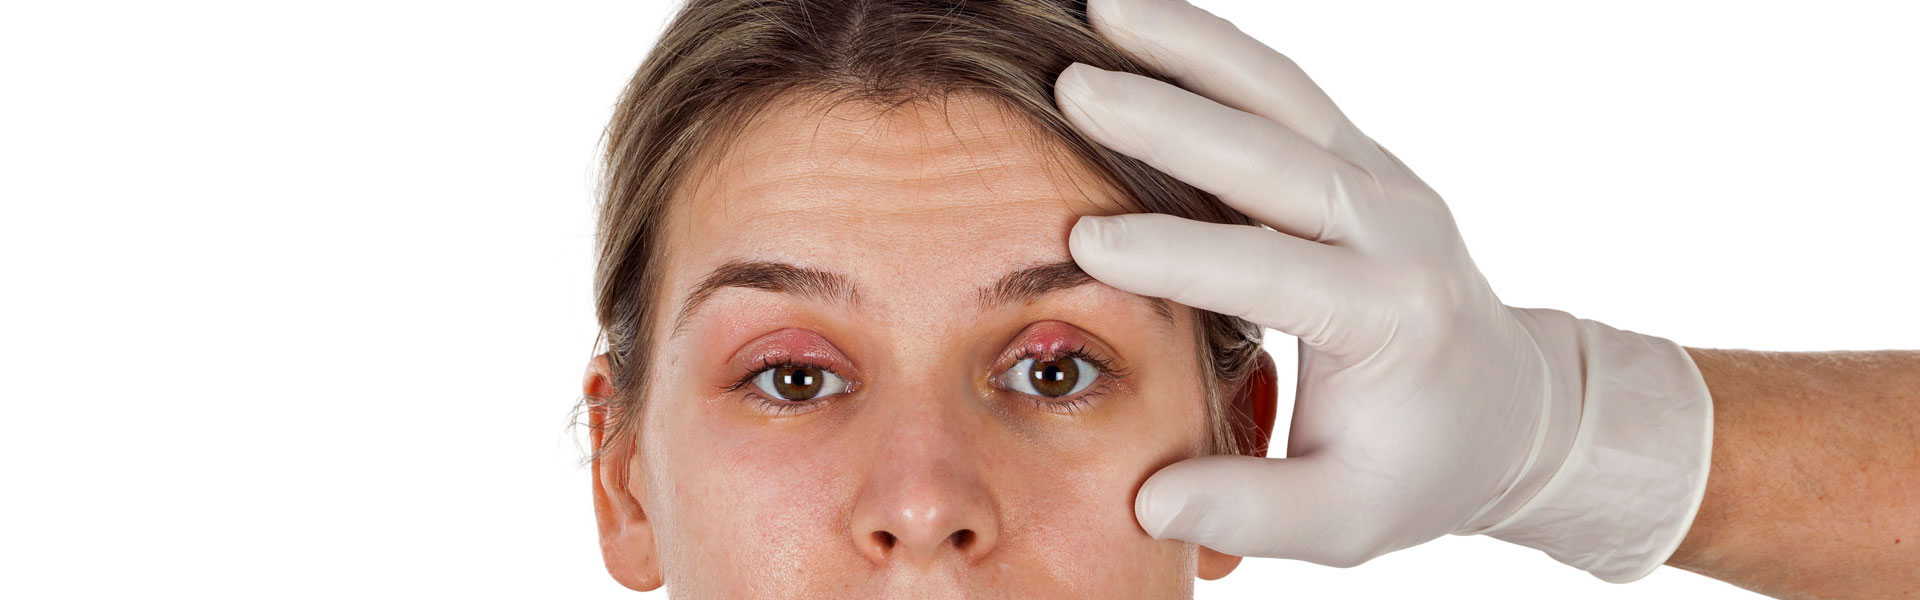 What You Need to Know About Blepharoplasty